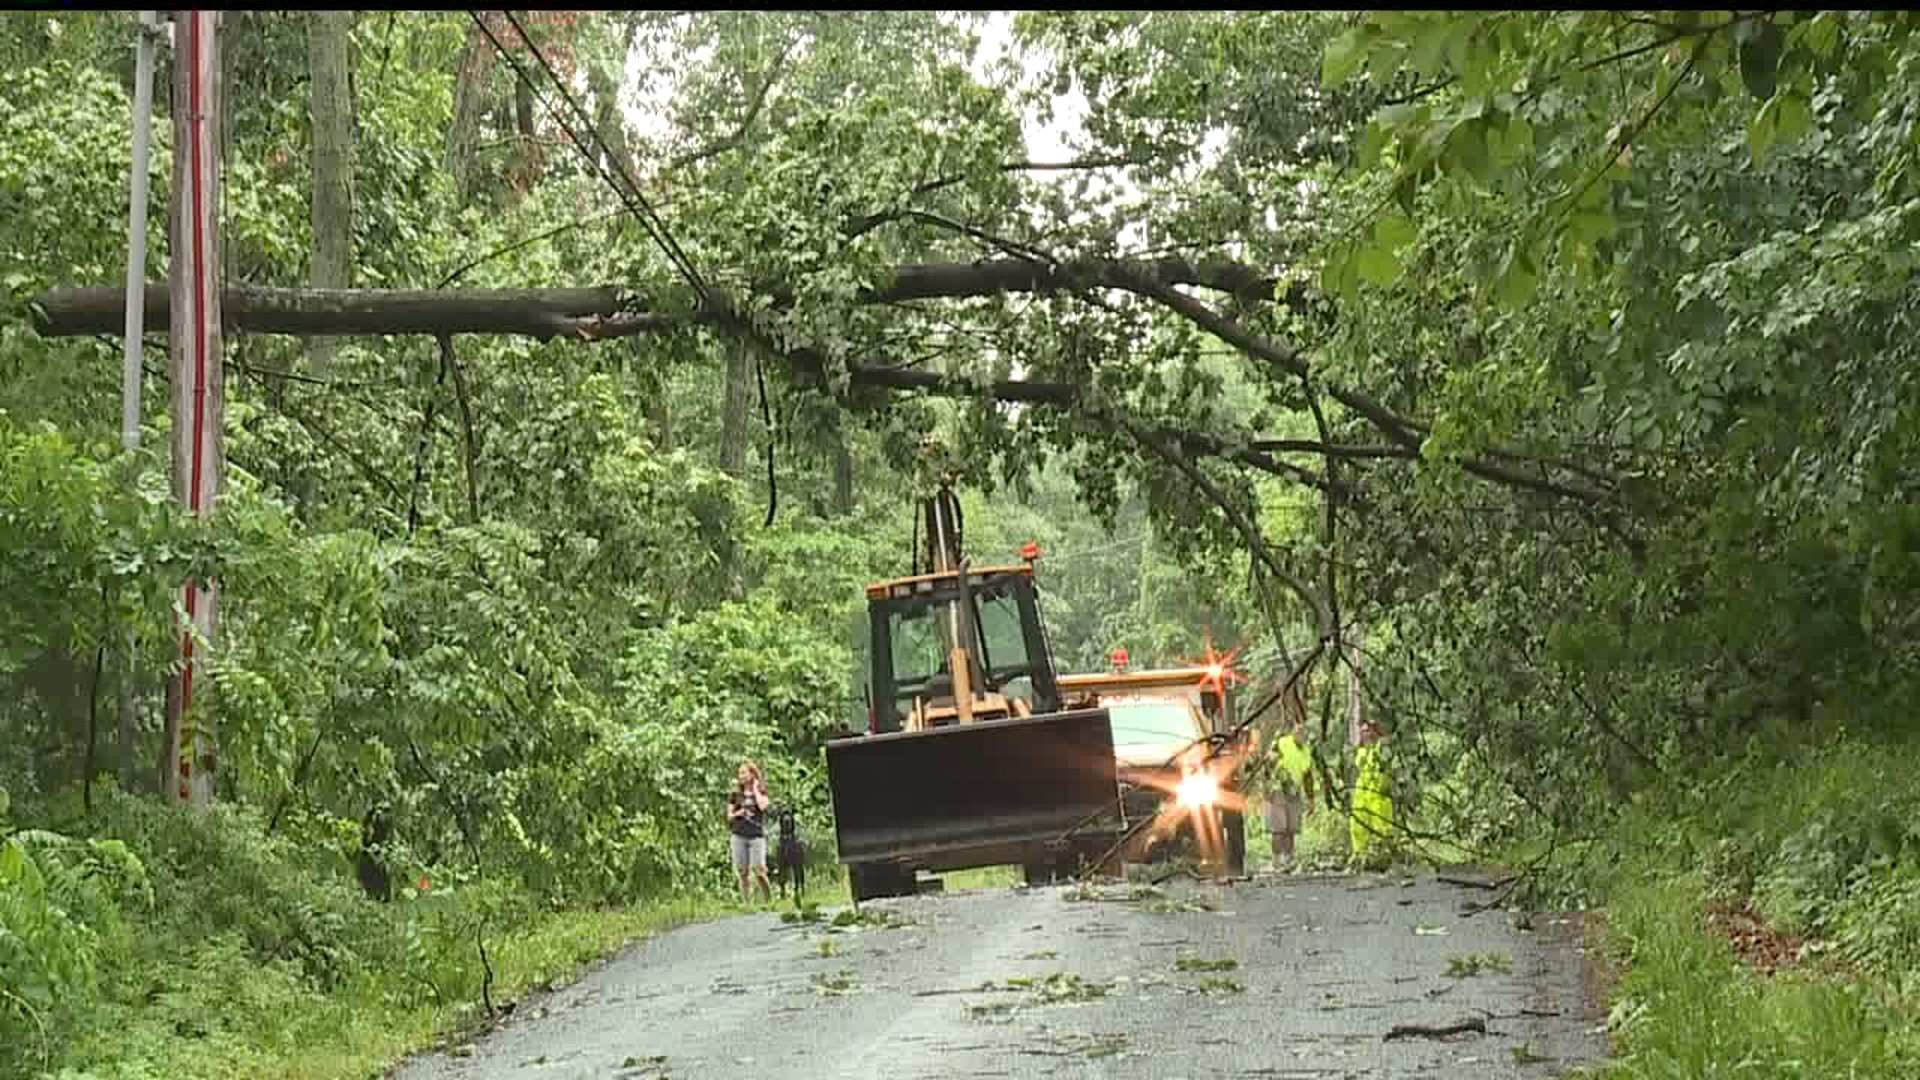 Crews work to clear debris from roads in York County after storm